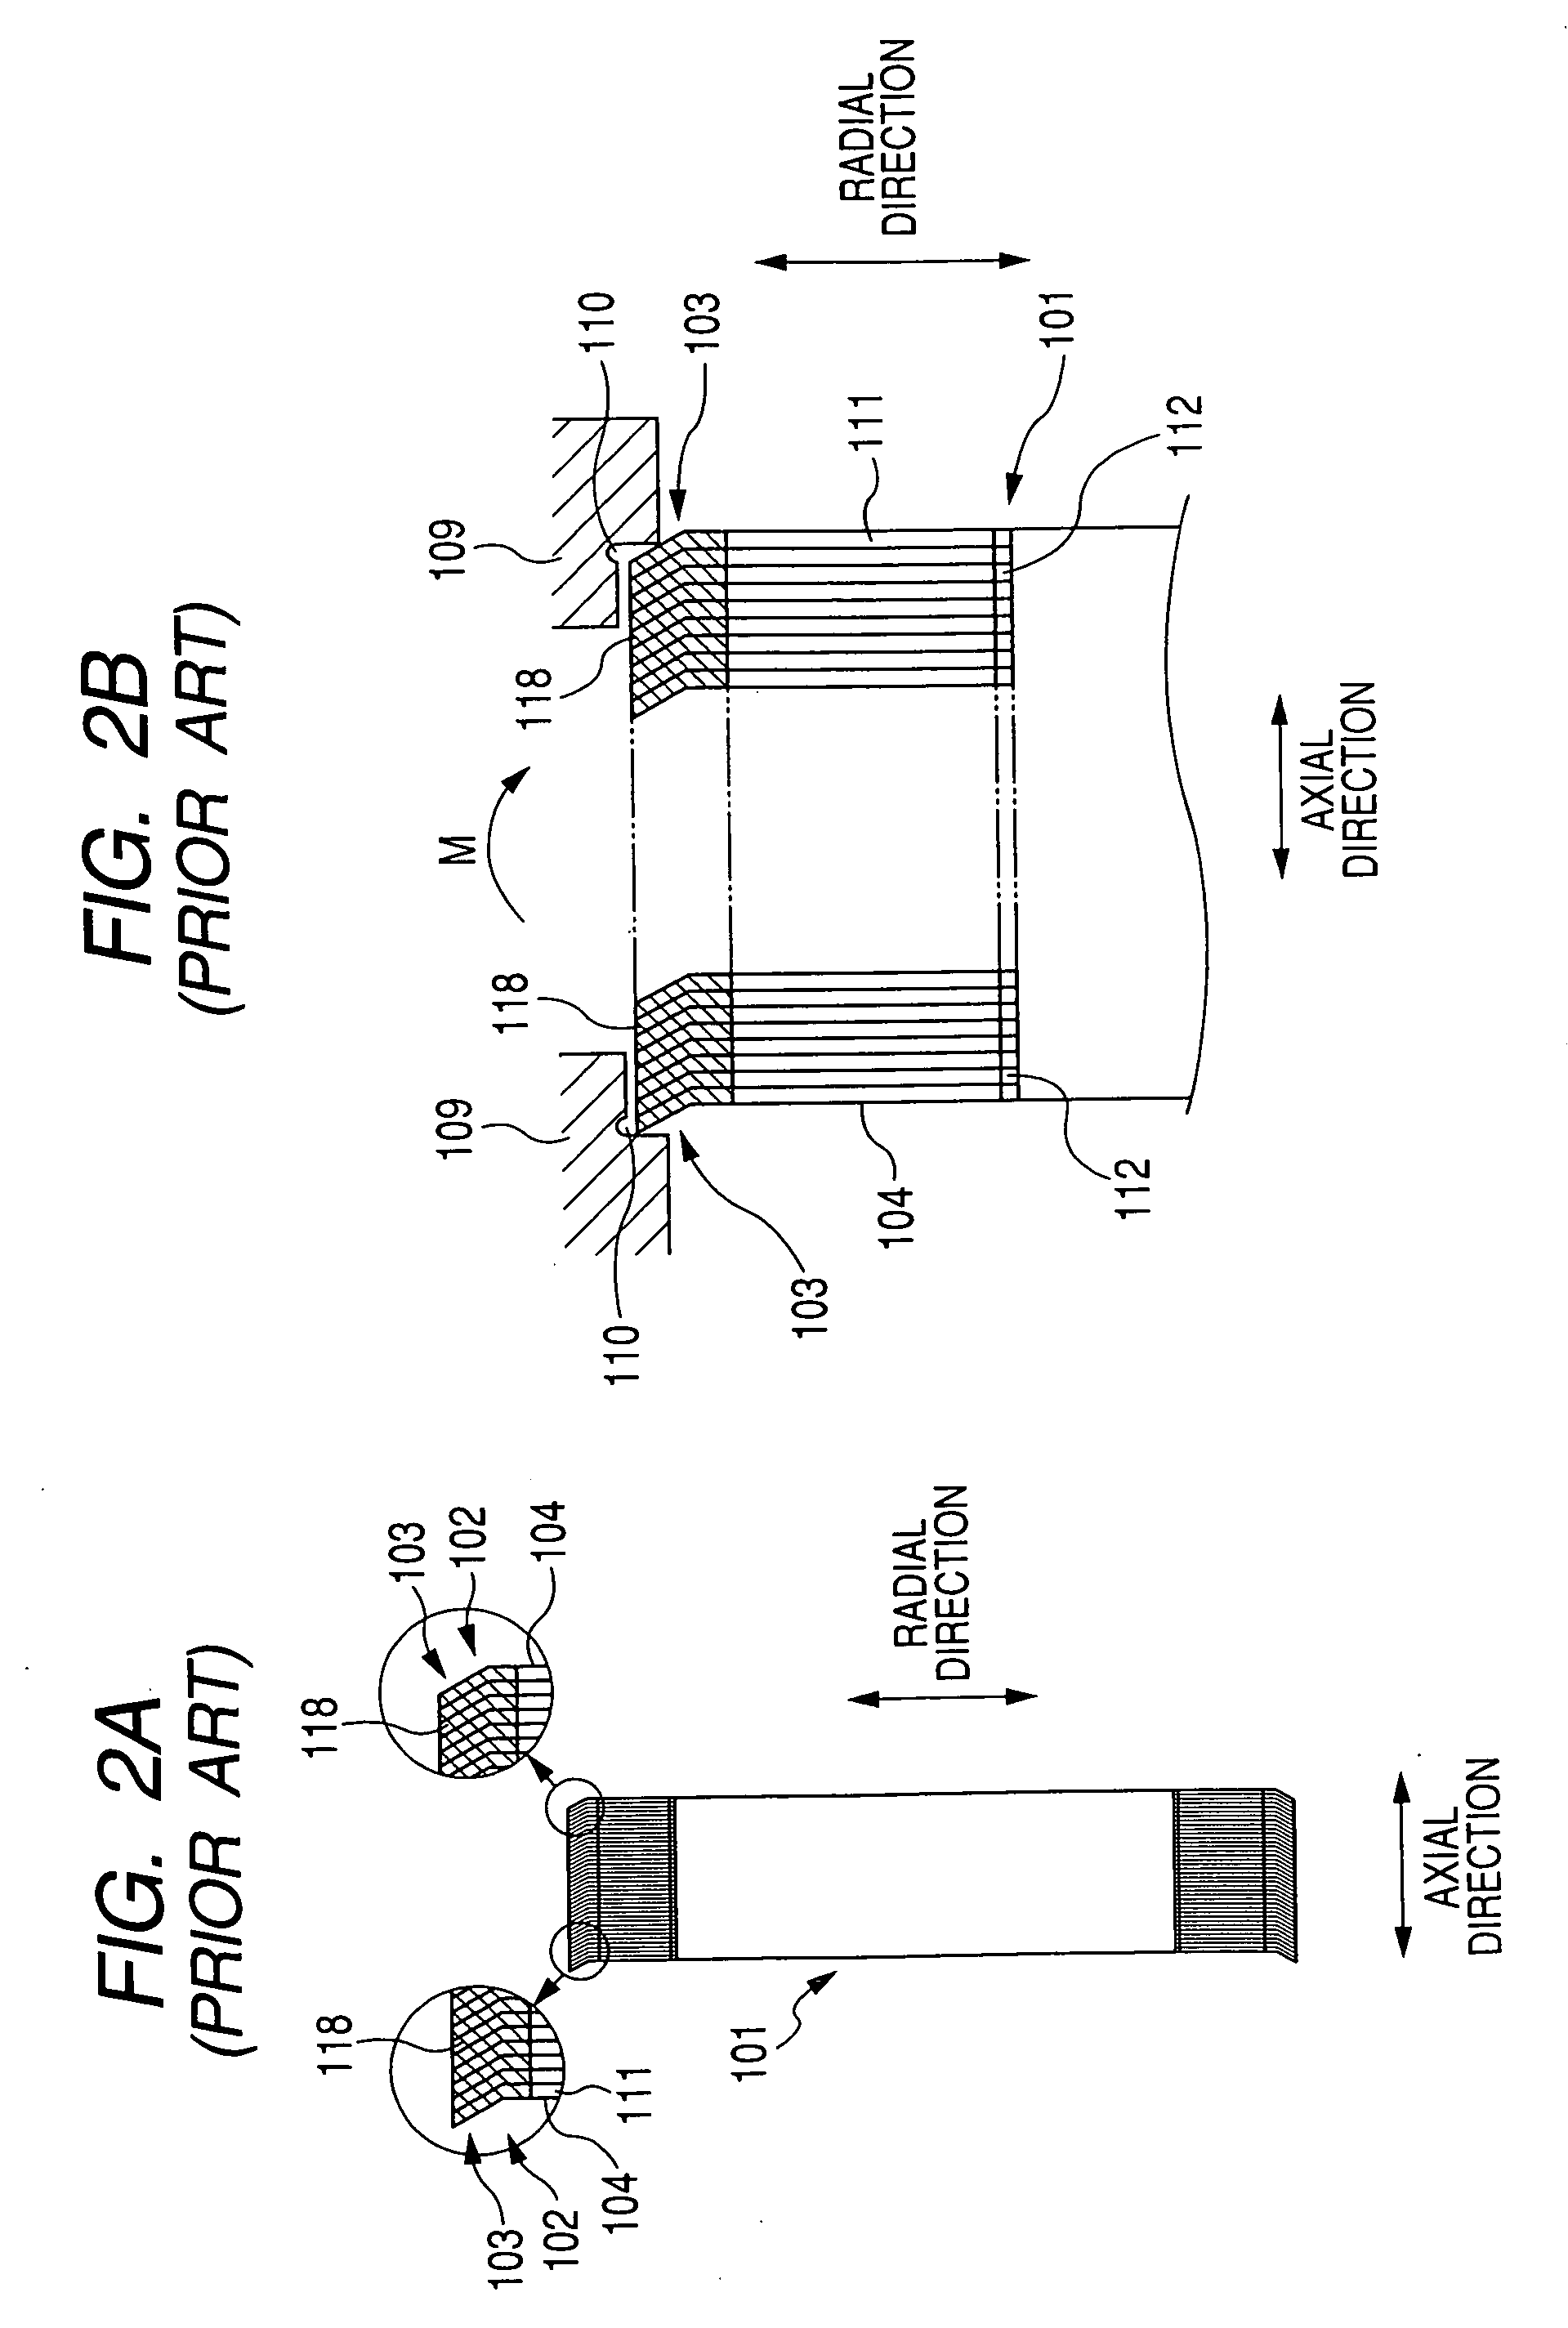 Stator core of electric rotating machine and method of manufacturing the core